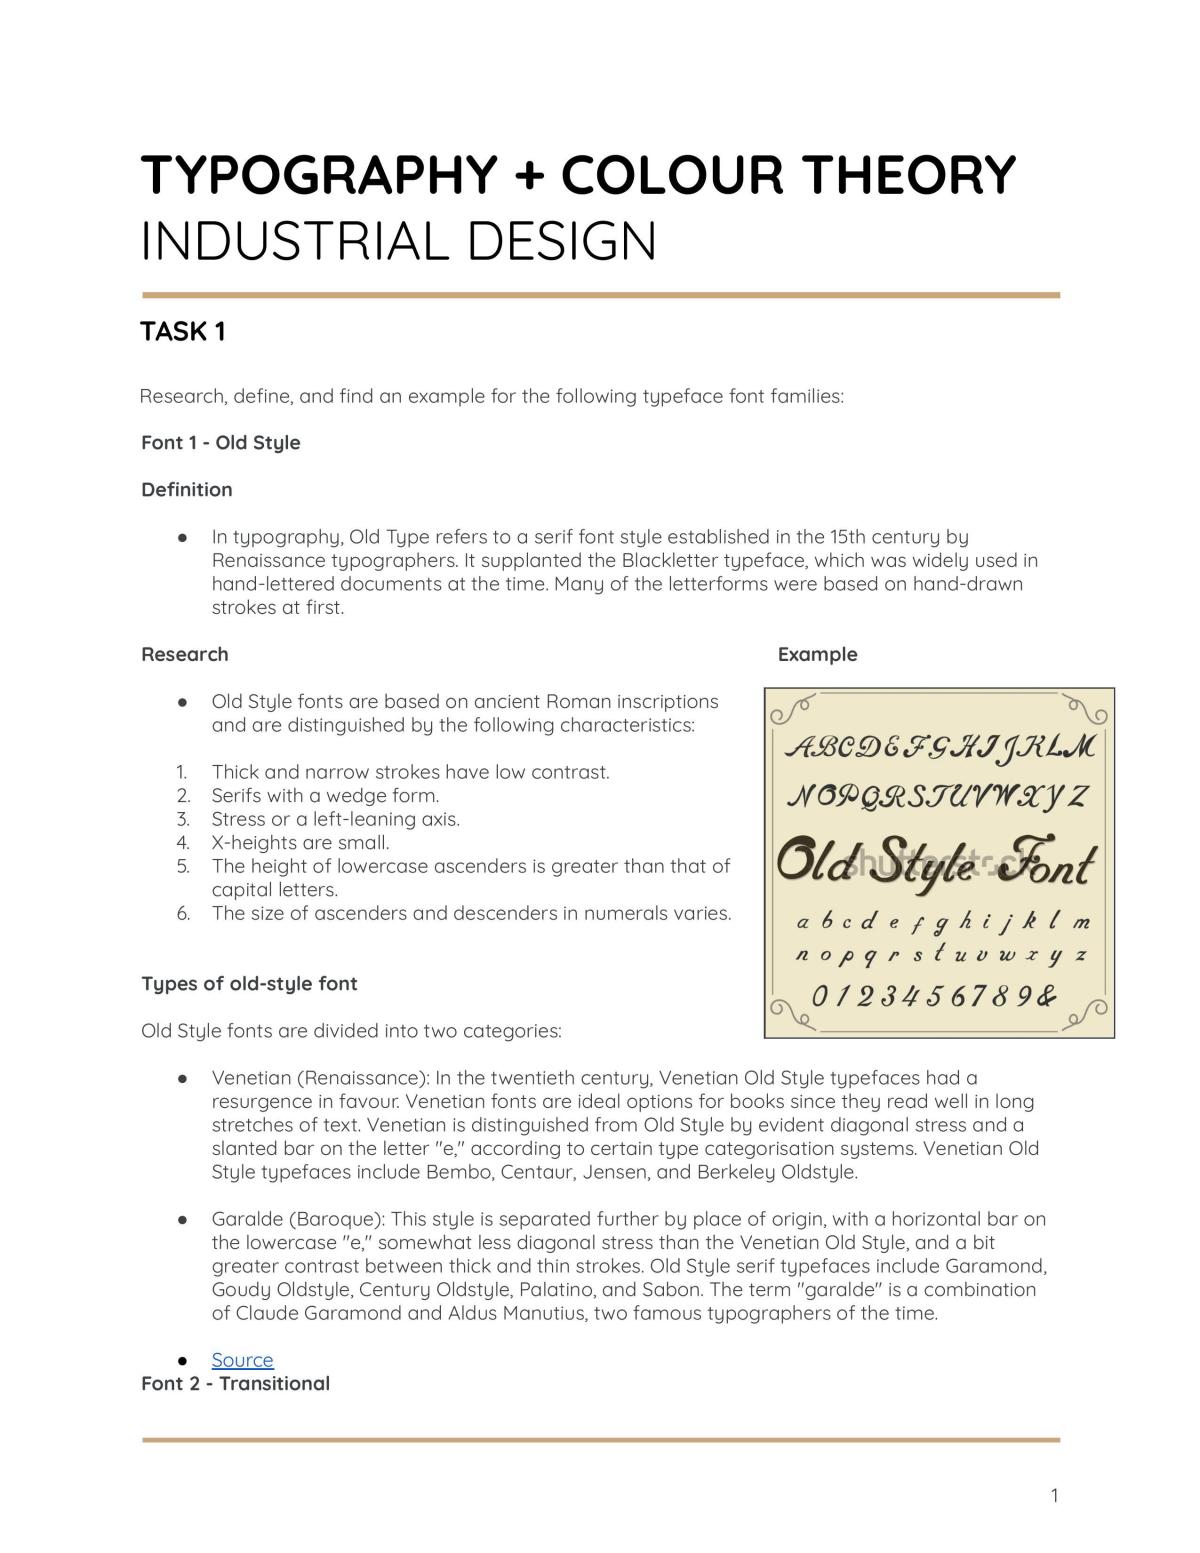 Typography and Colour Theory - Page 1